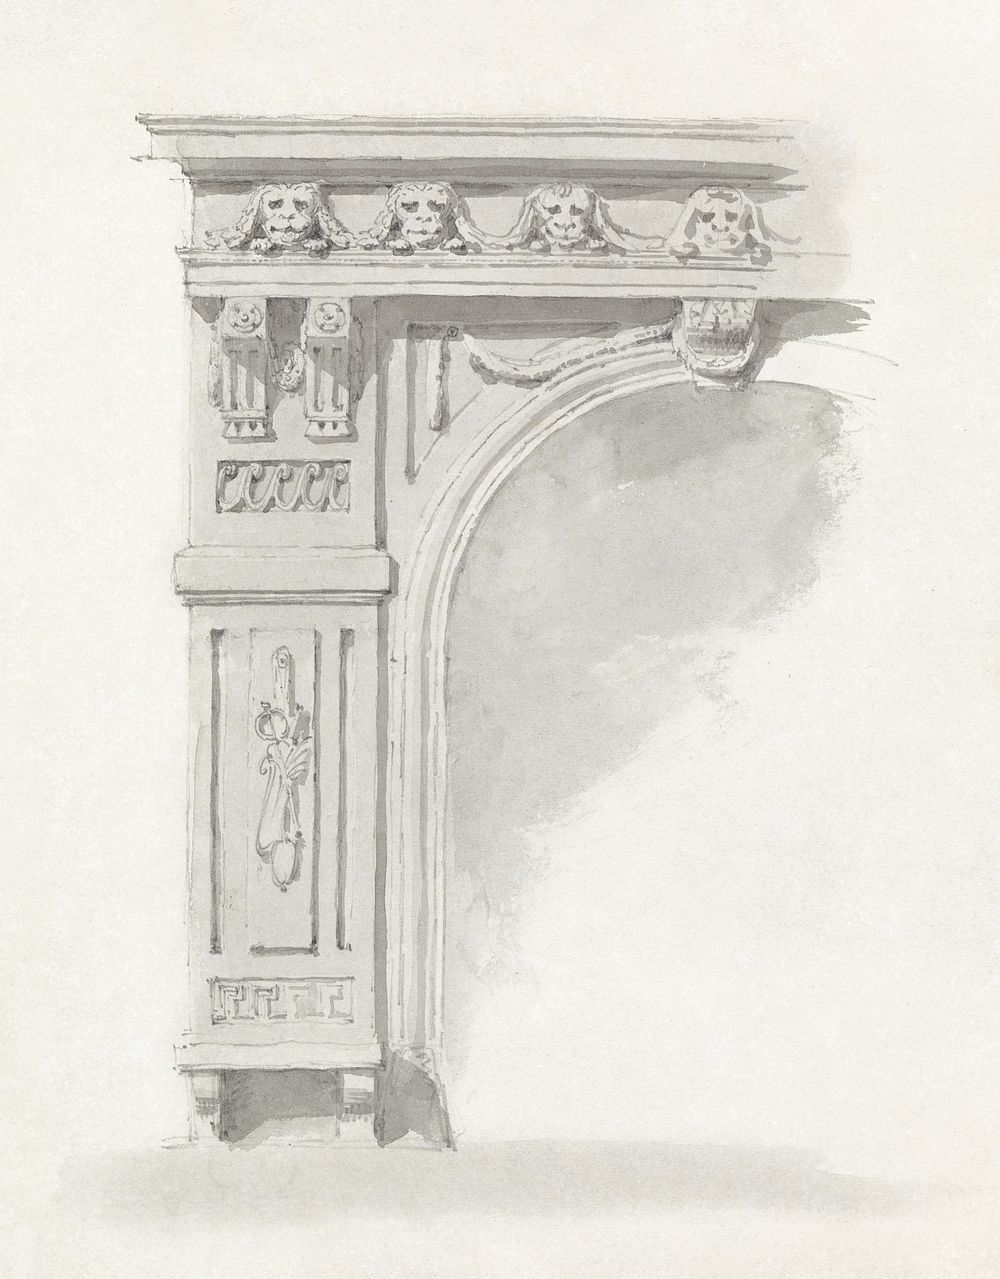 Sketch of an Ornamental Arched Entry. Original public domain image from Yale Center for British Art. Digitally enhanced by…